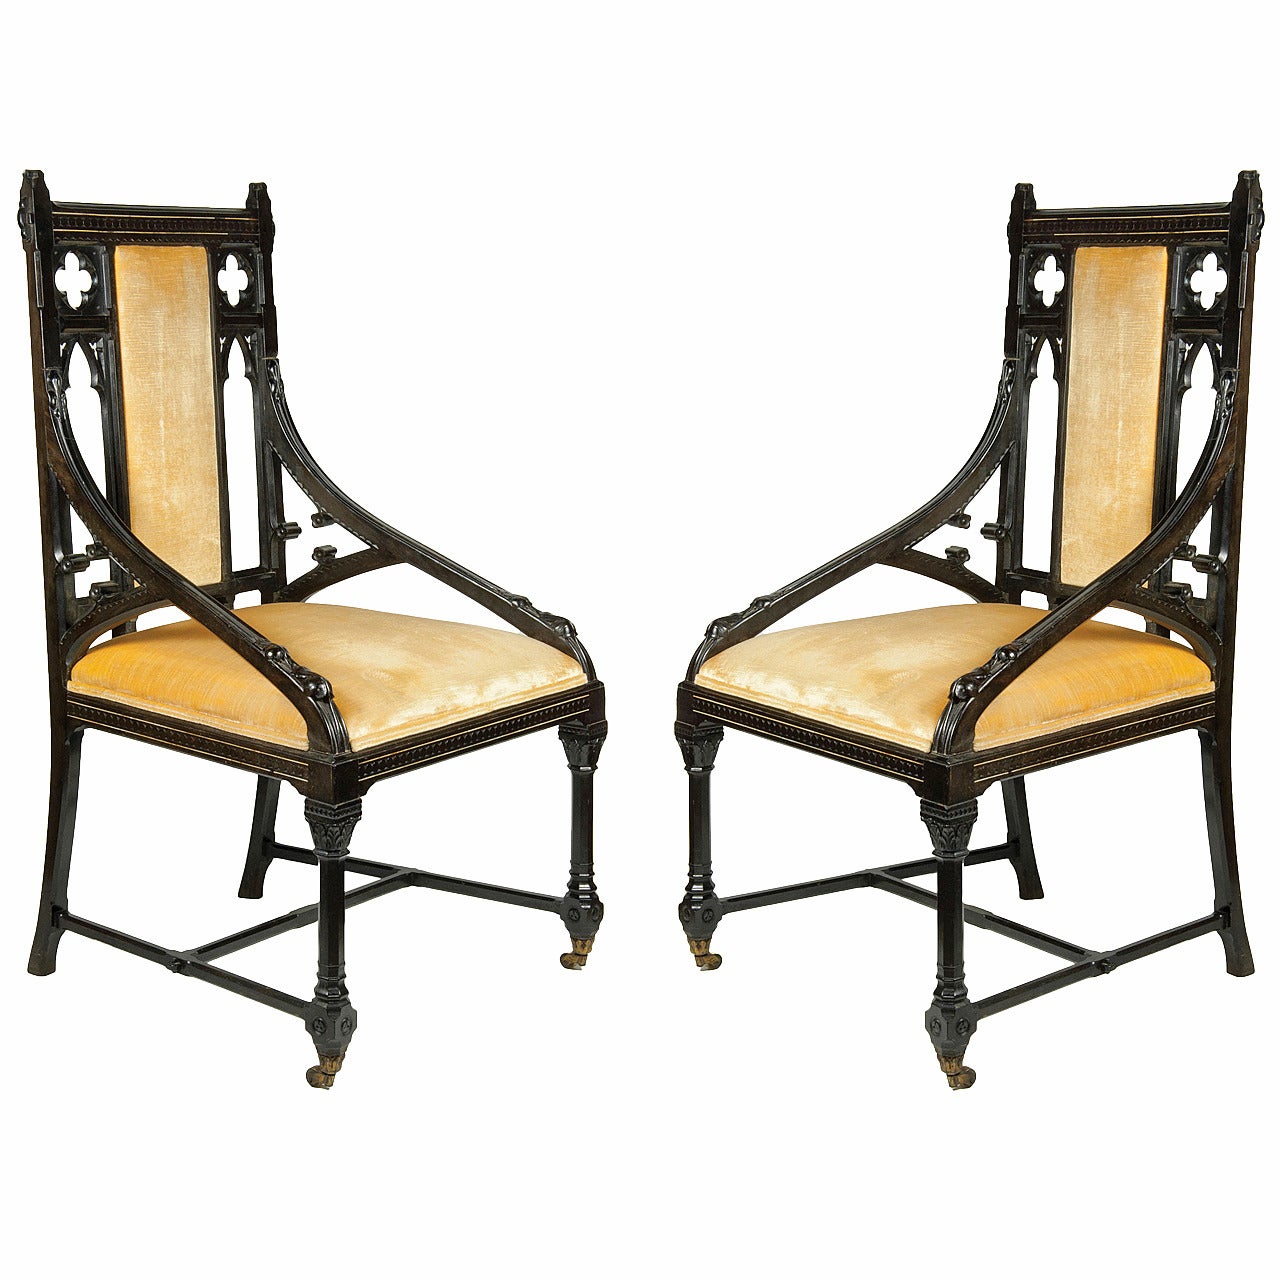 Splendid Pair of Gothic Revival Chairs, Ebony with Ivory Inlay, circa 1862 For Sale